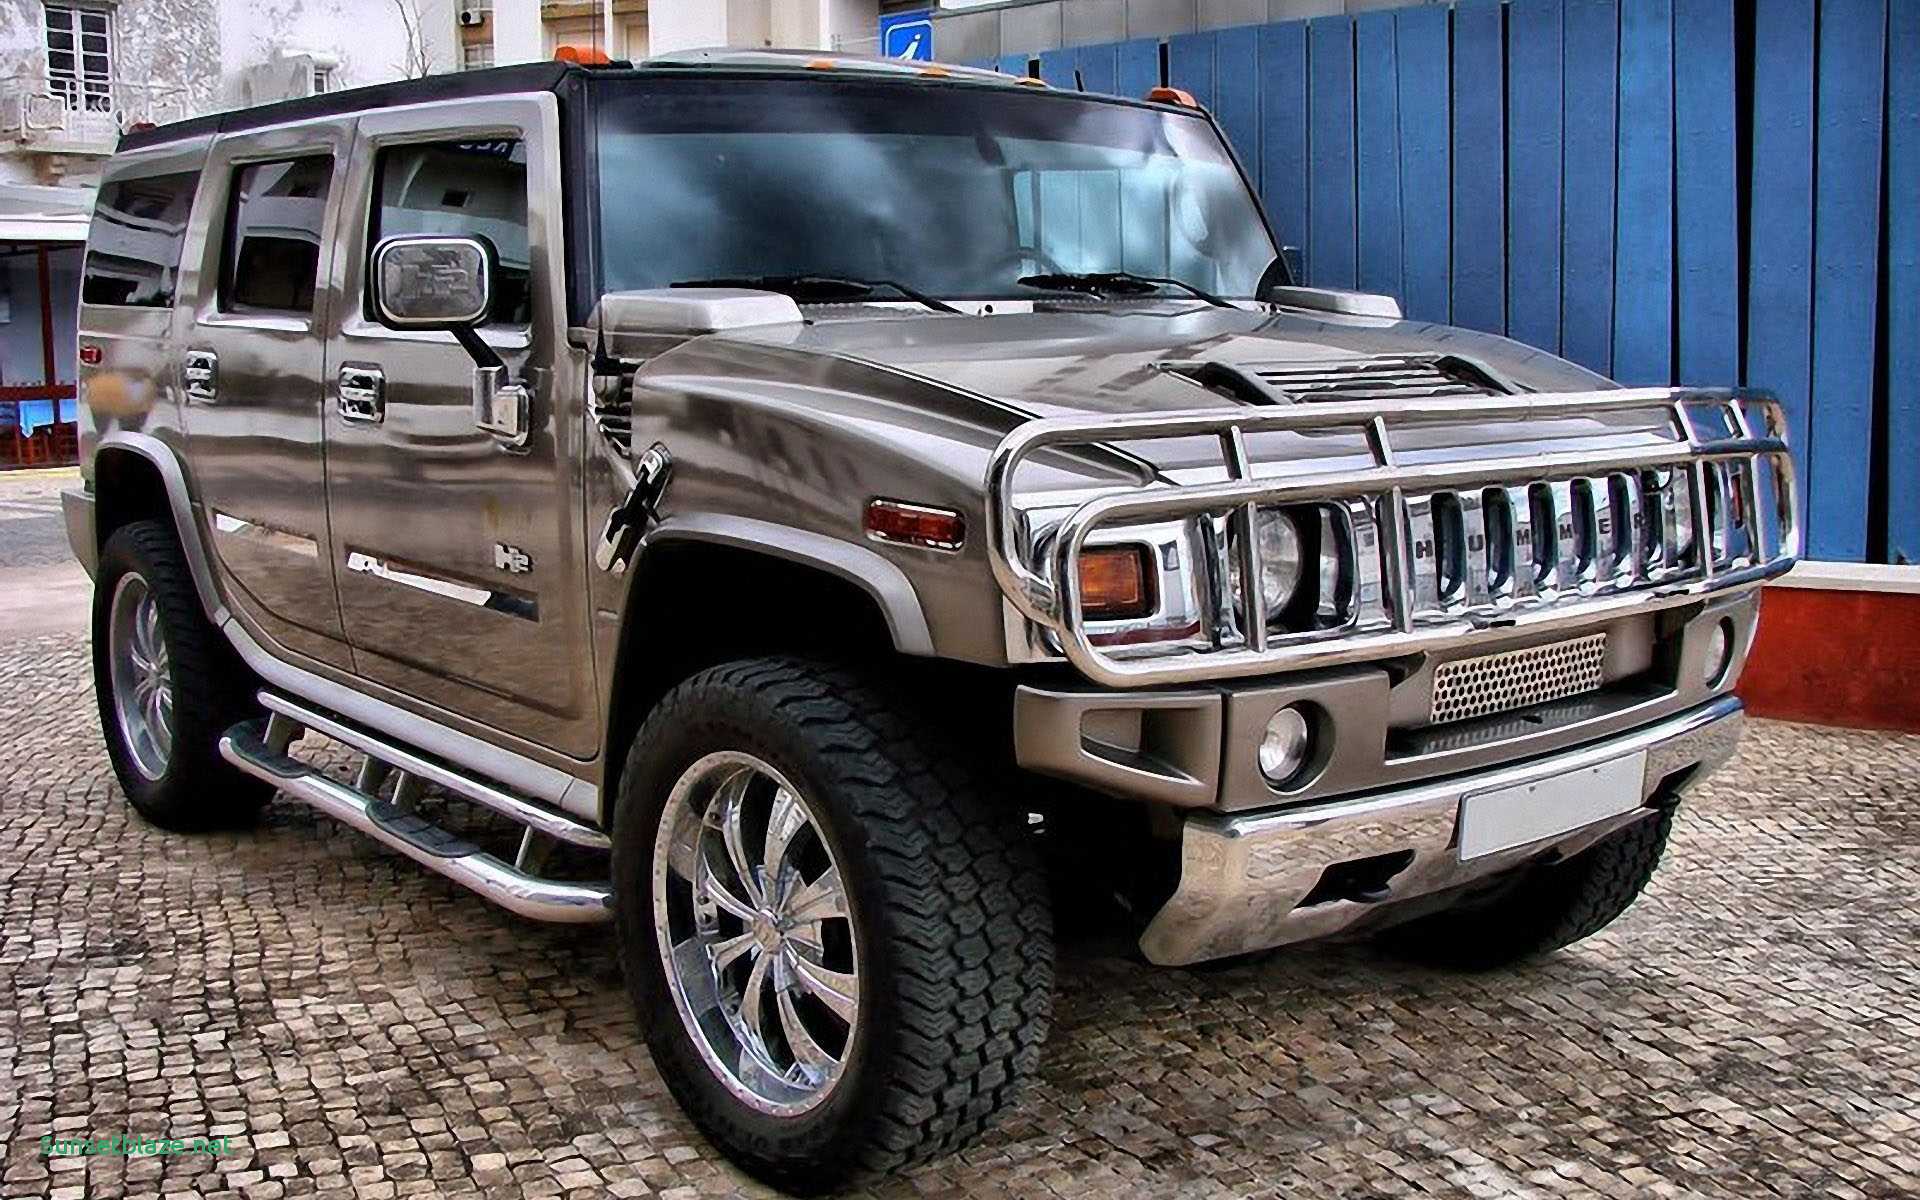 Hummer HD Wallpaper, Picture